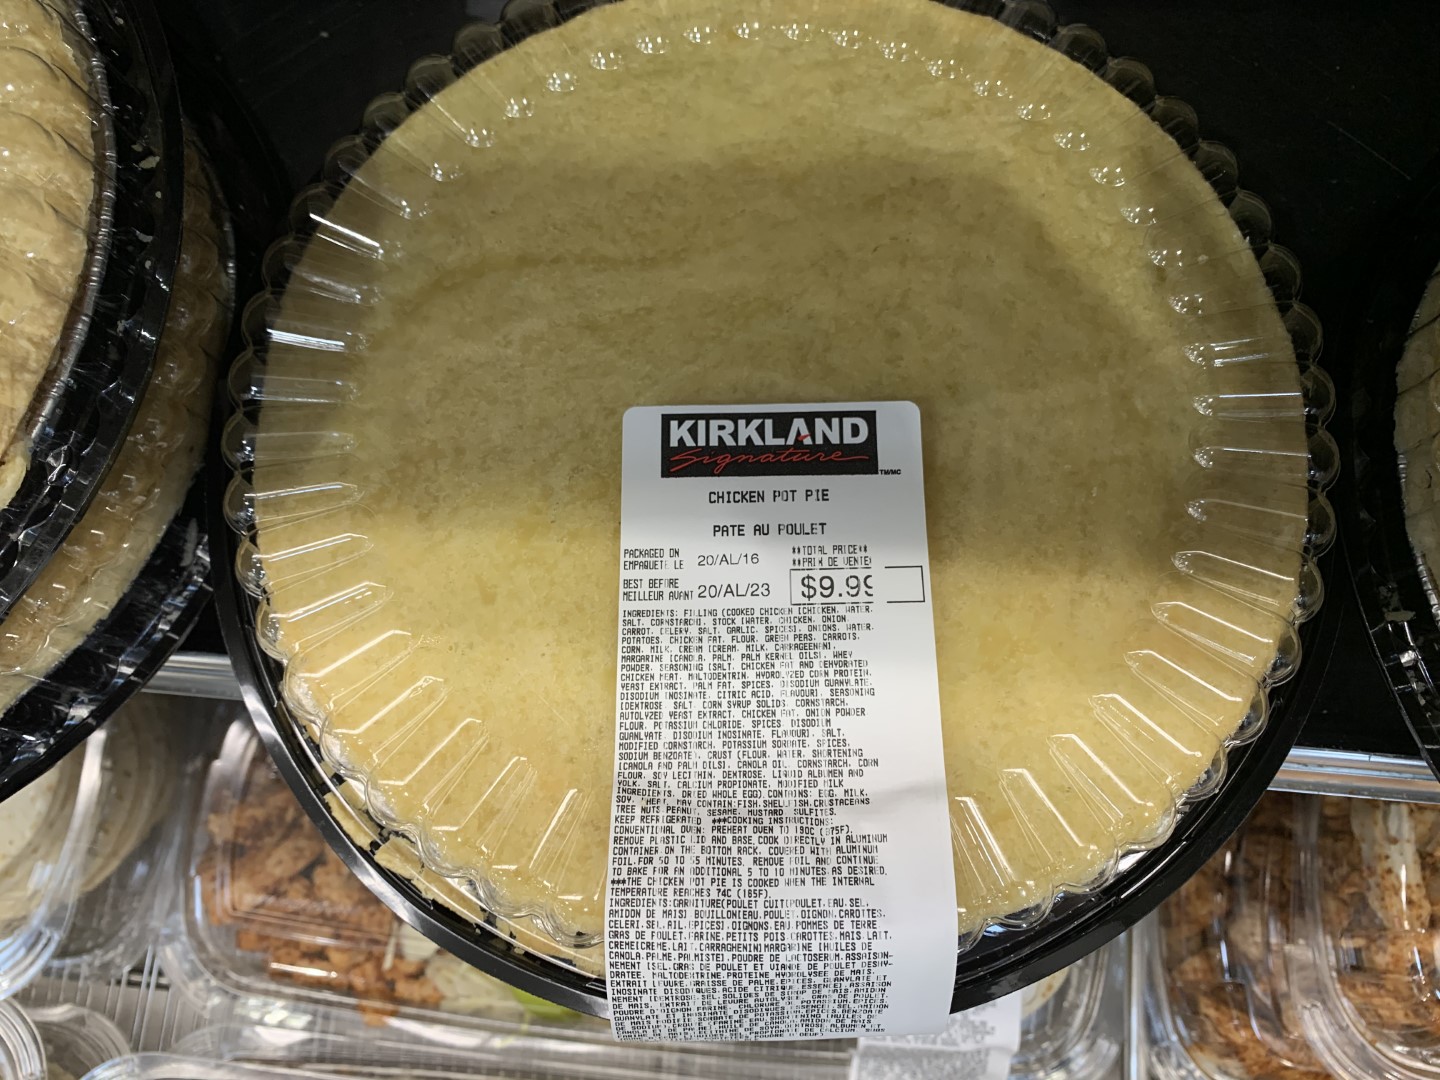 Weekend Update – Costco Sale Items for Apr 17-19, 2020 for BC, AB, MB ...